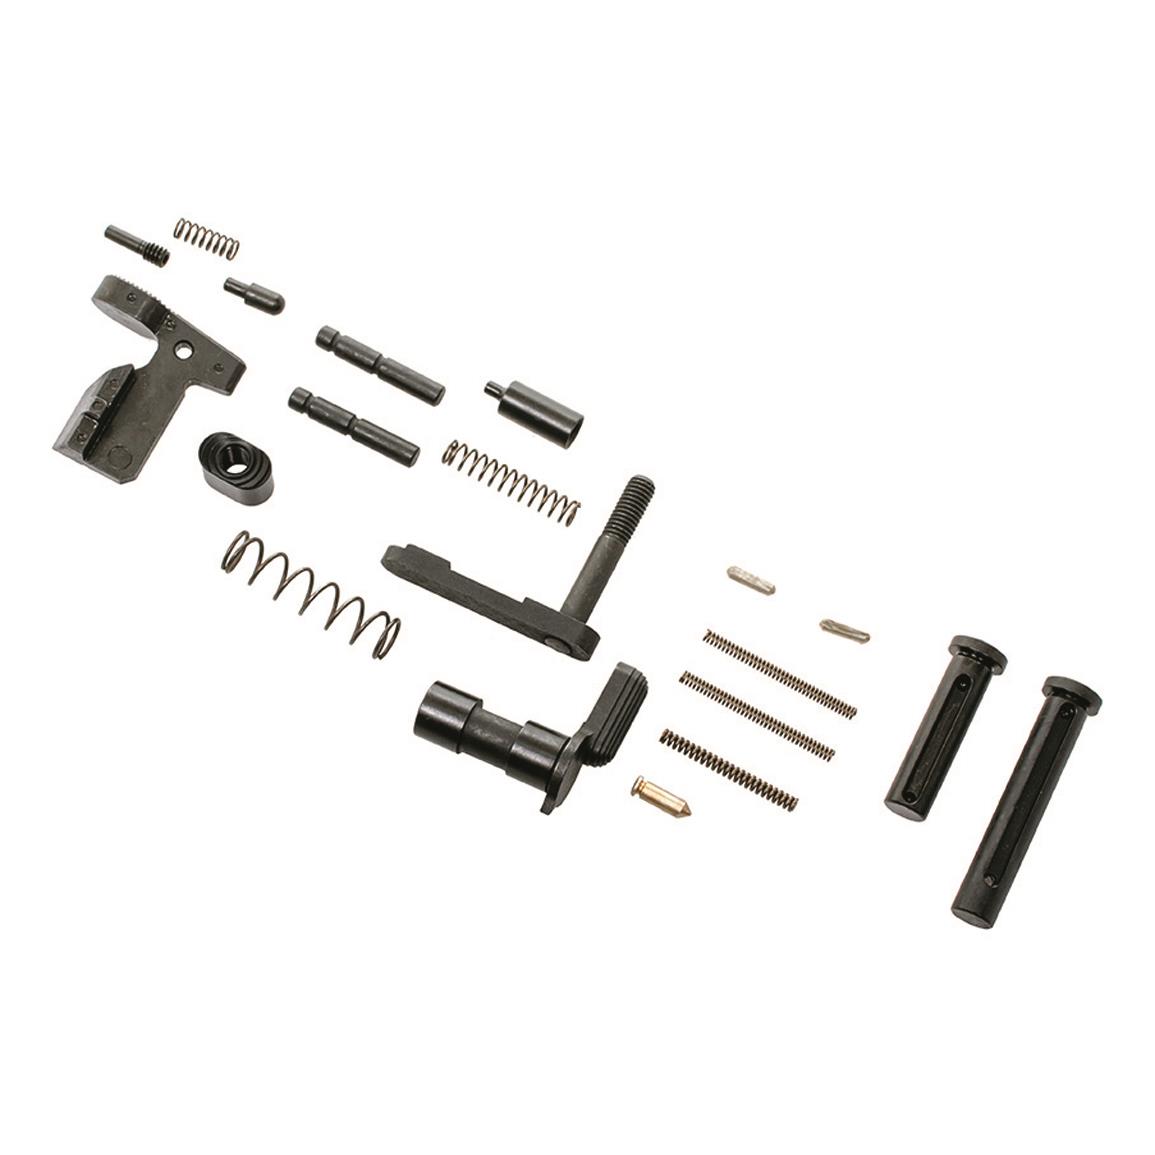 CMMG Gun Builder's Lower Parts Kit for Mk3 Lowers